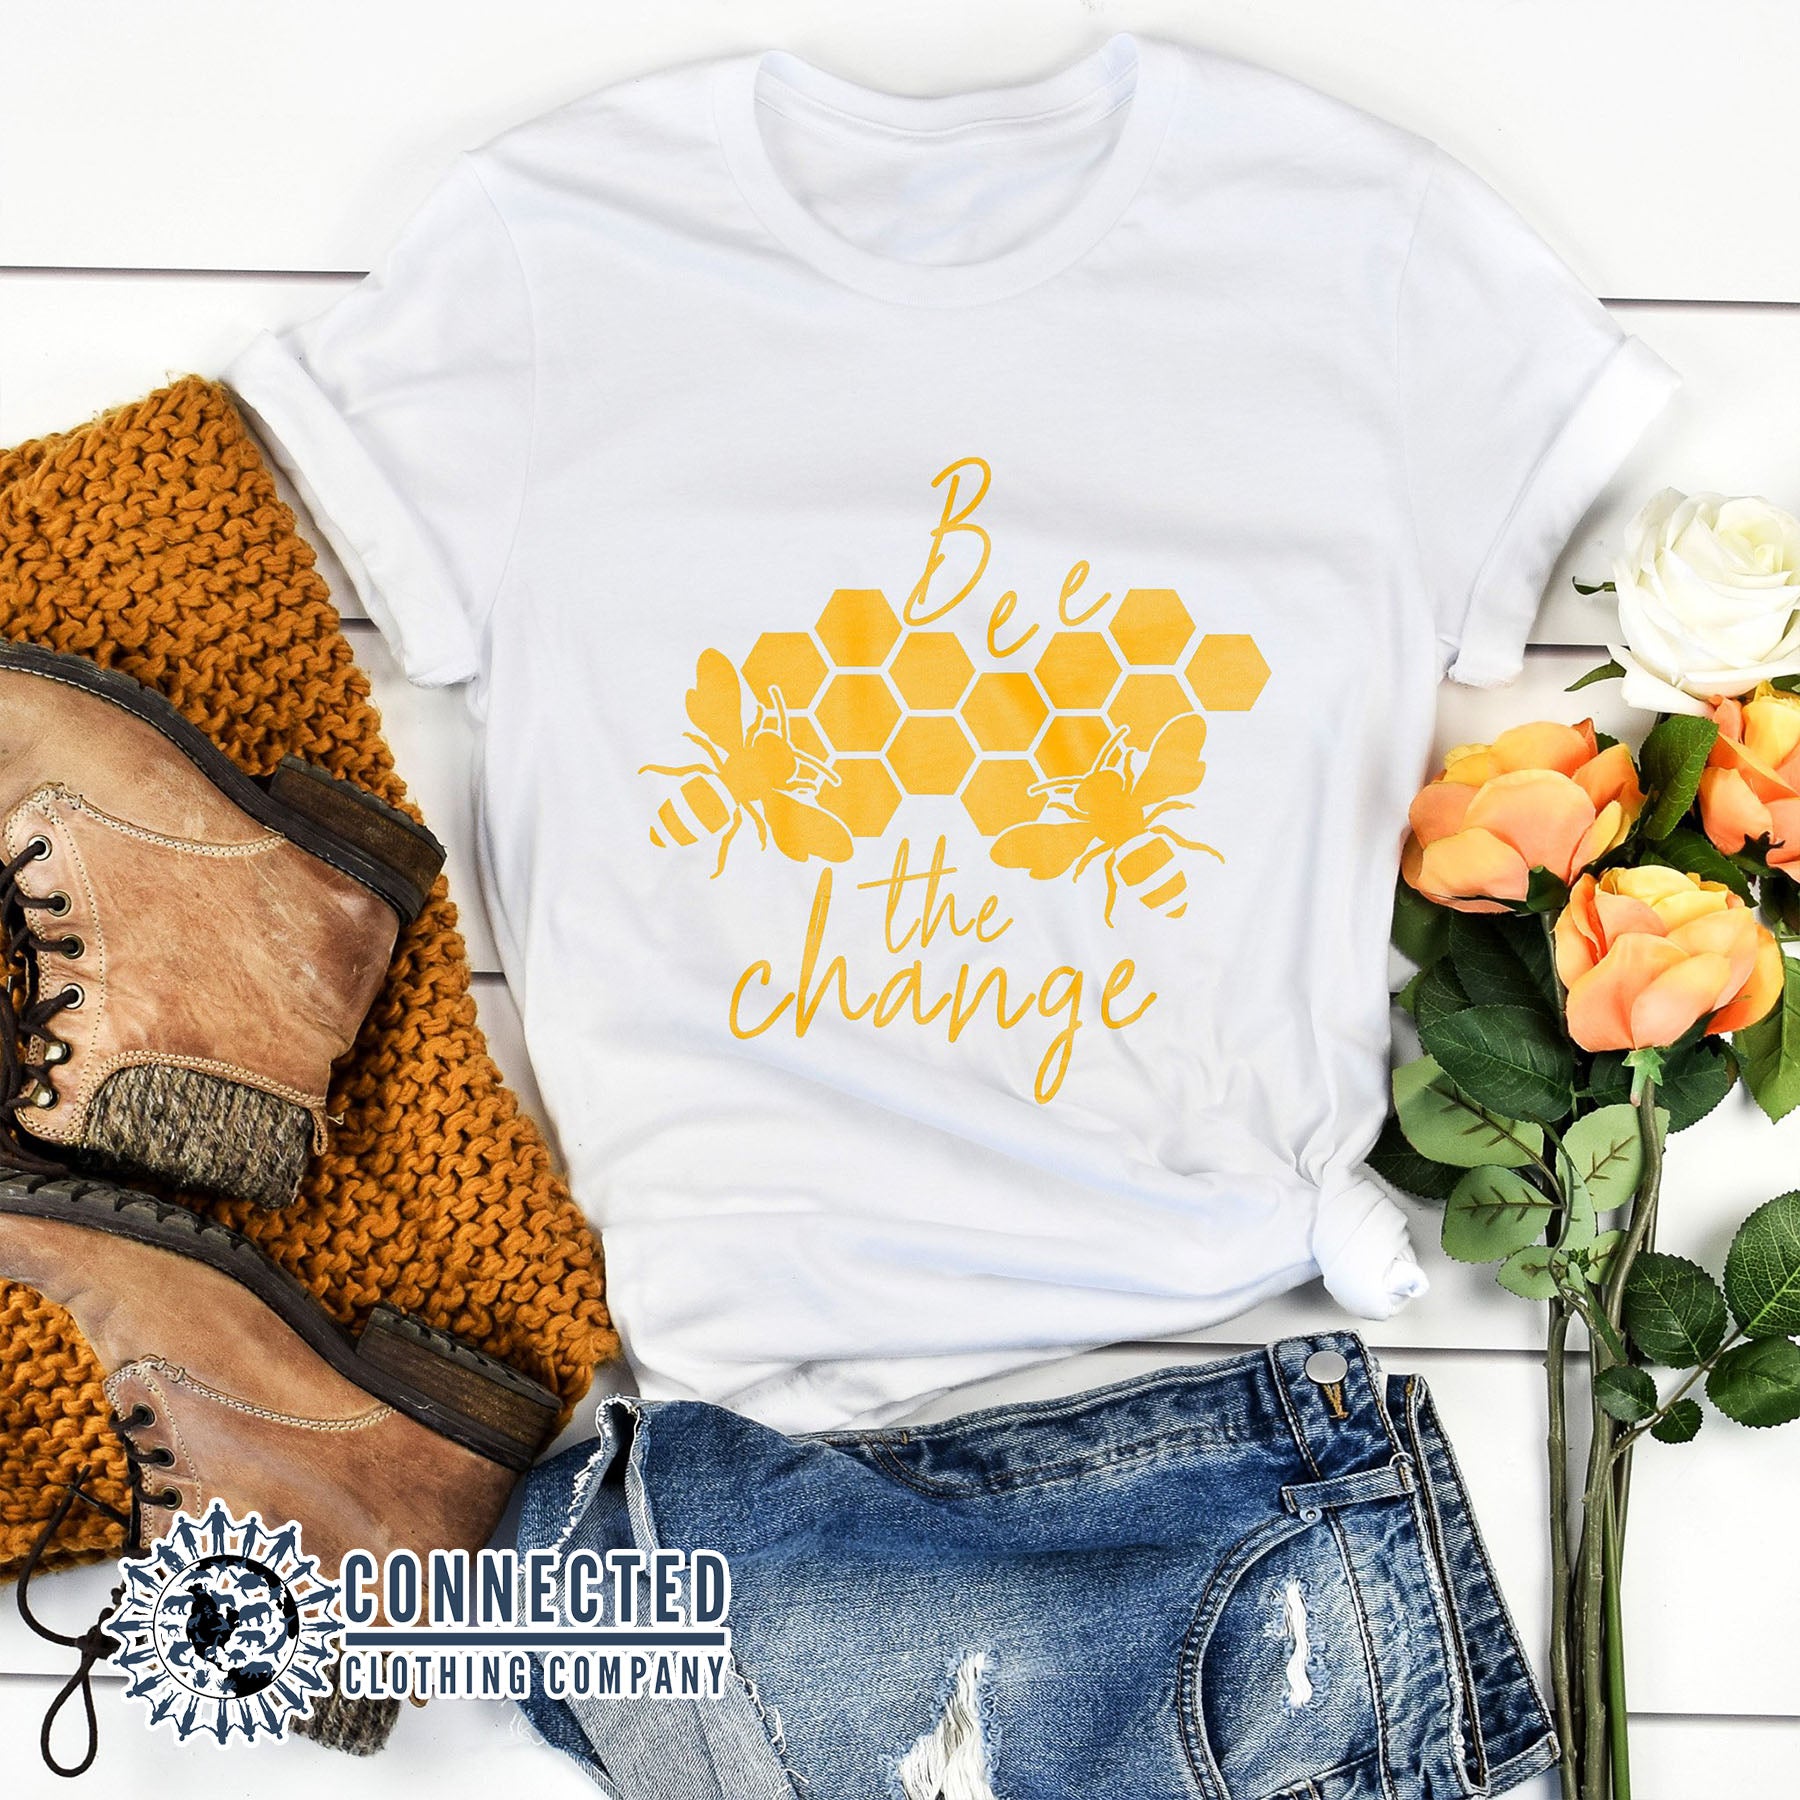 White Organic Cotton Bee The Change Short-Sleeve Tee - sharonkornman - Ethically and Sustainably Made - 10% of profits donated to the Honeybee Conservancy